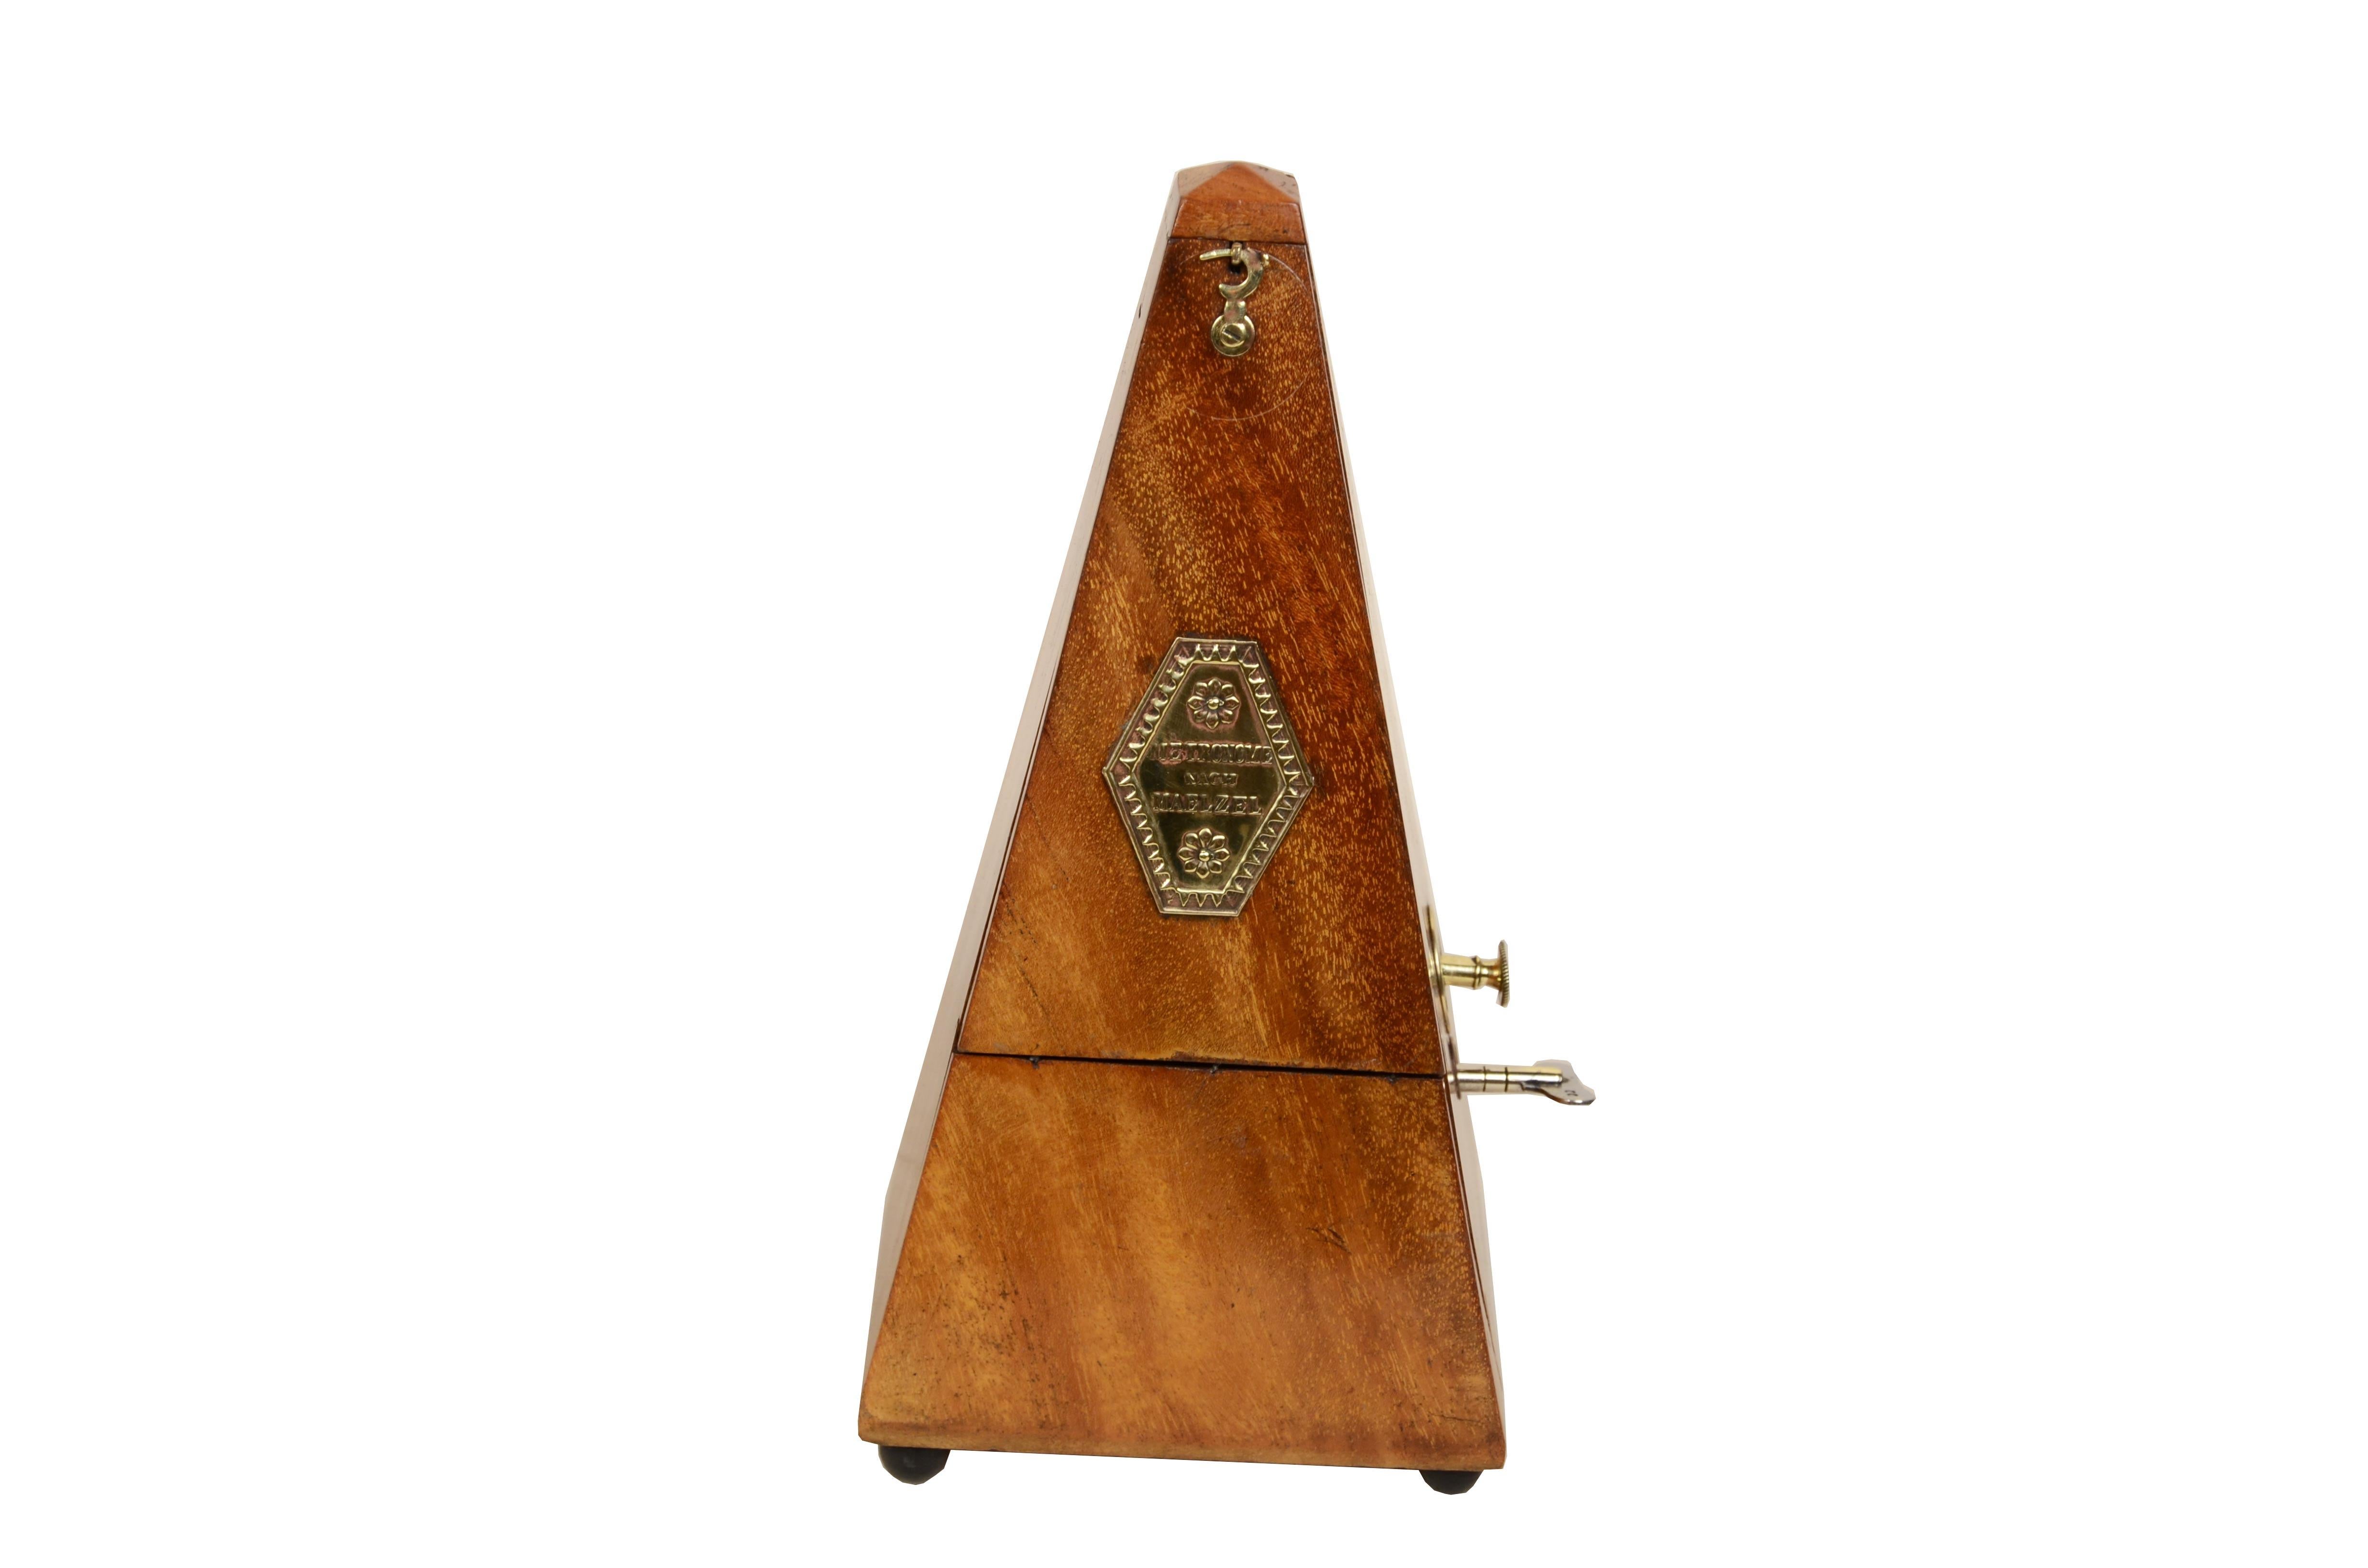 Metronome system  Johan Maelzel (1772-1838) from the early 1900s. This is an instrument used to measure the tempo of music; the sound of the pendulum accurately signals the speed of performance.  The instrument consists of a pendulum with a